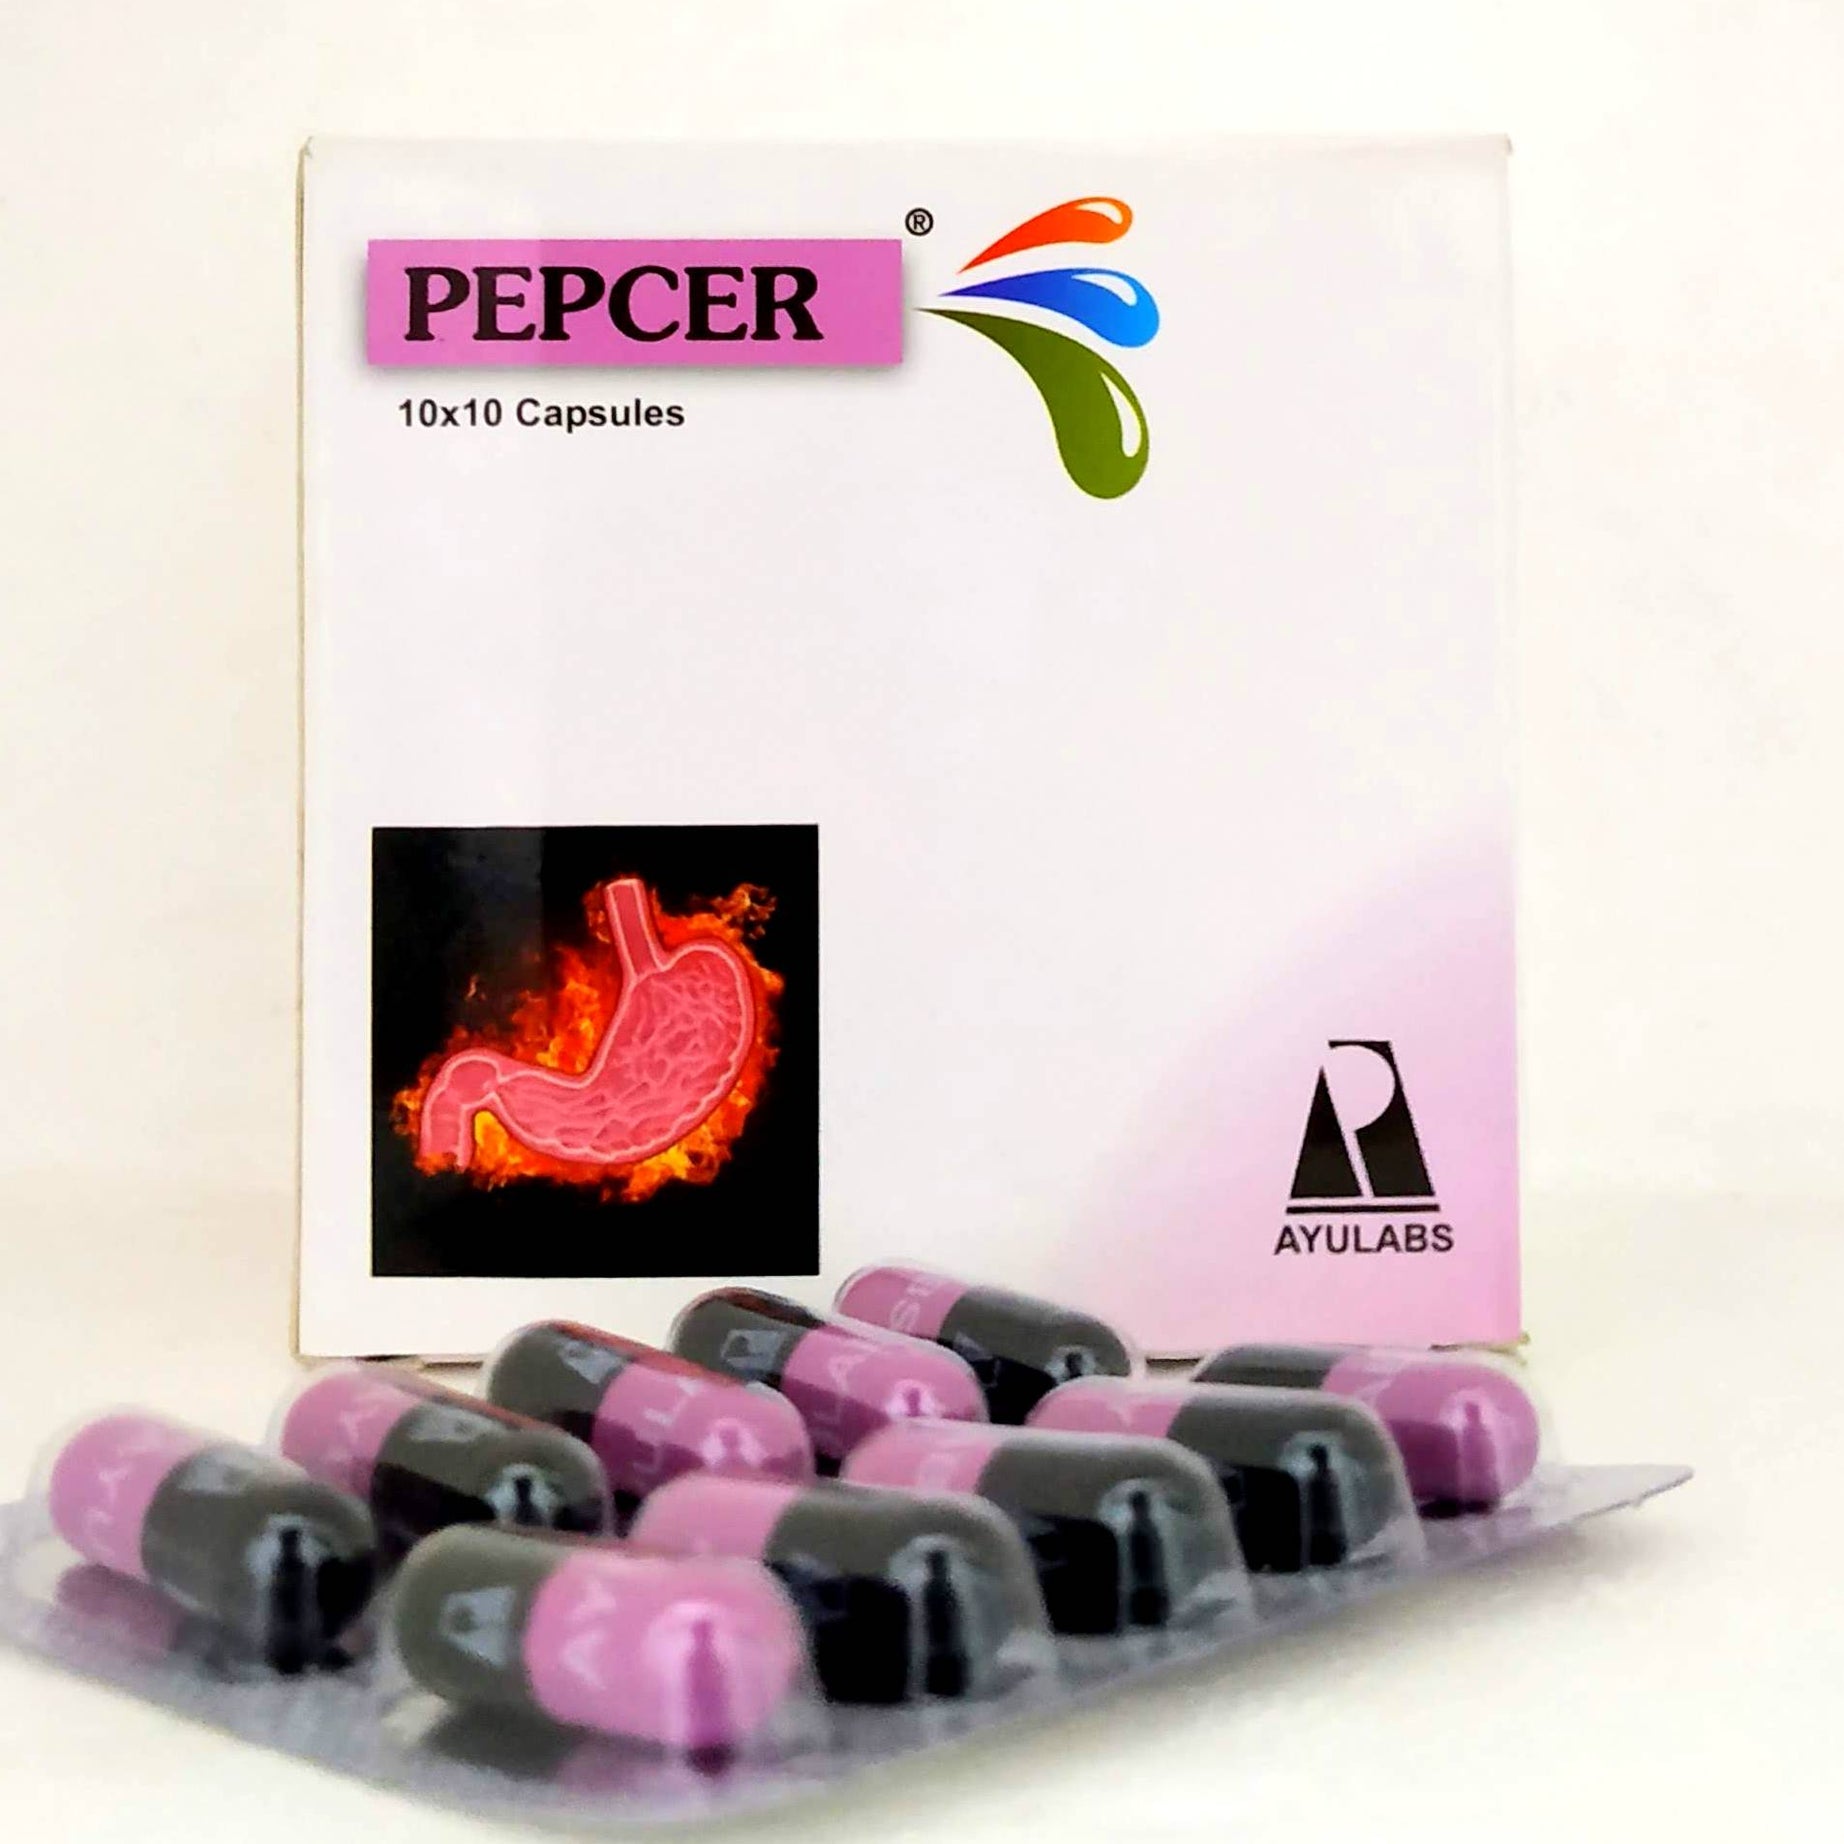 Shop Pepcer Capsules - 10Capsules at price 40.00 from Ayulabs Online - Ayush Care